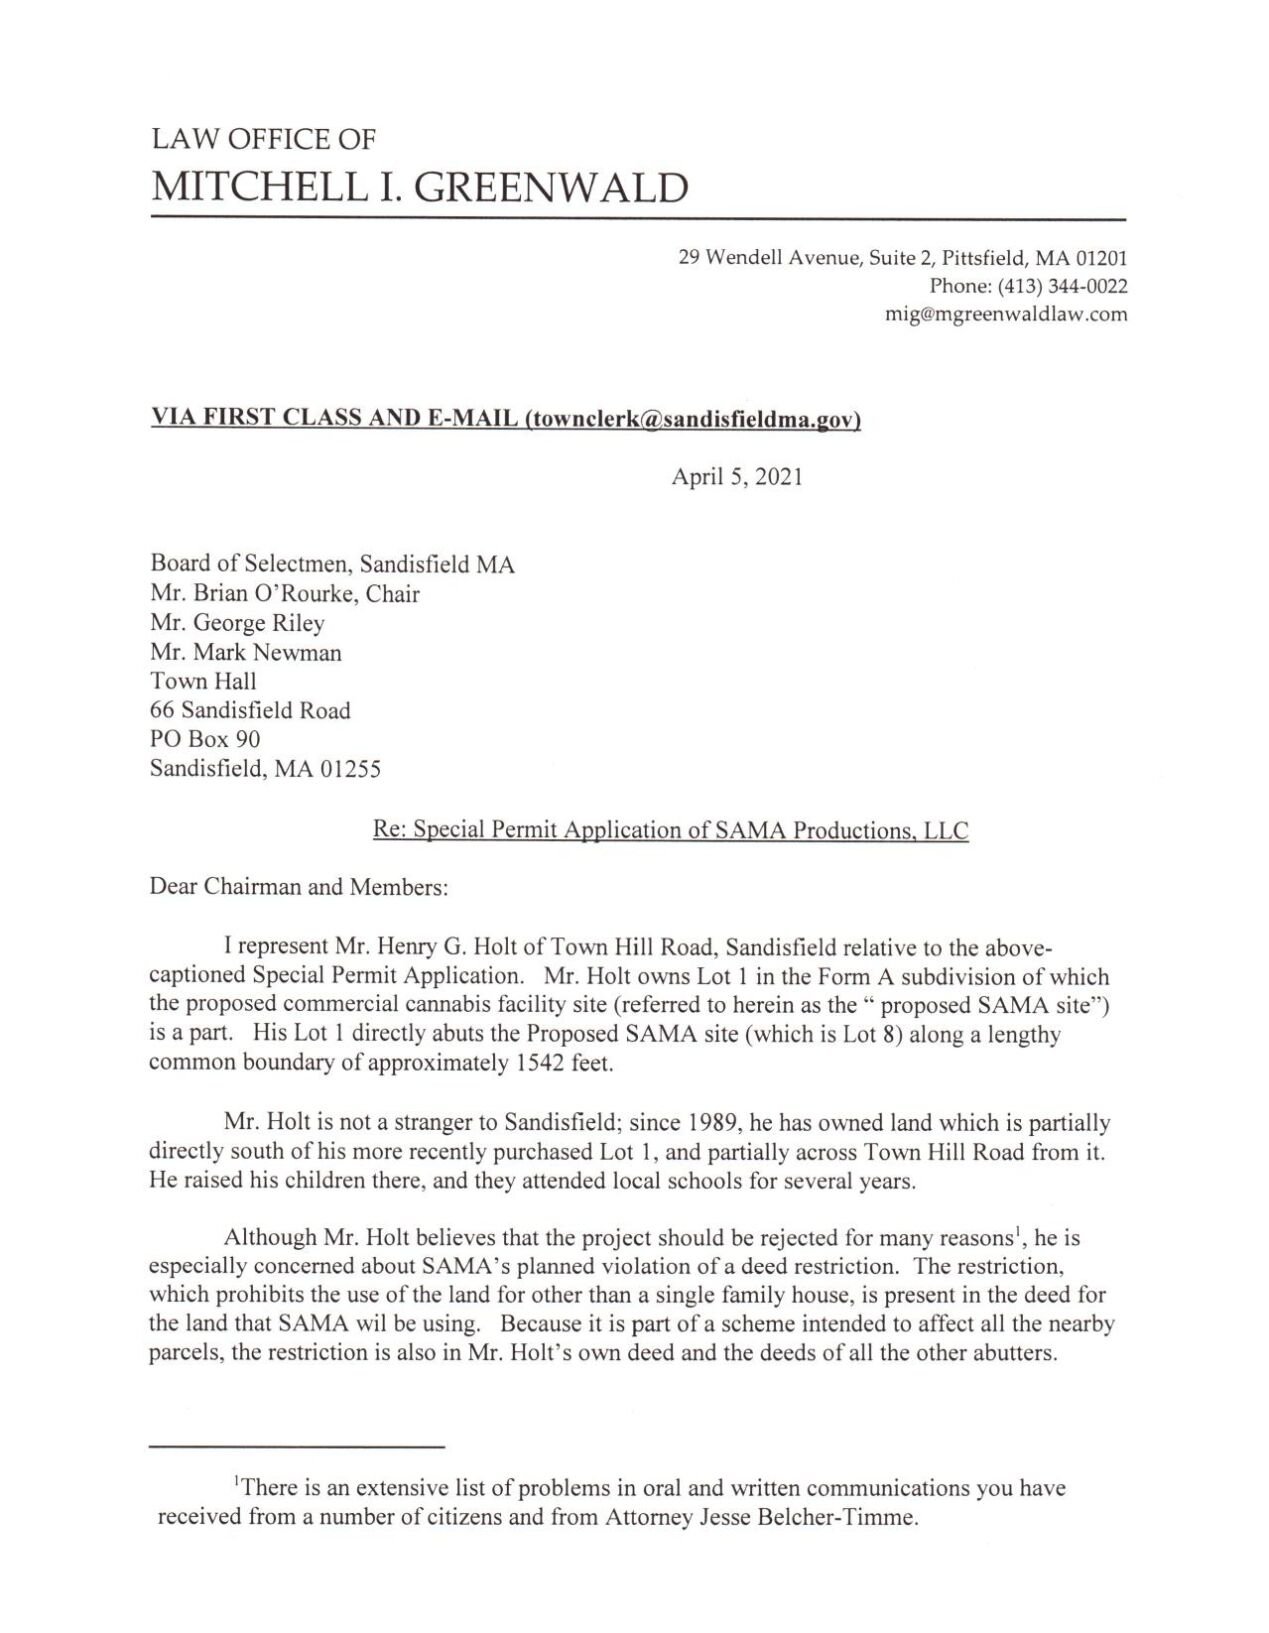 Letter from Mitchell Greenwald to Sandisfield